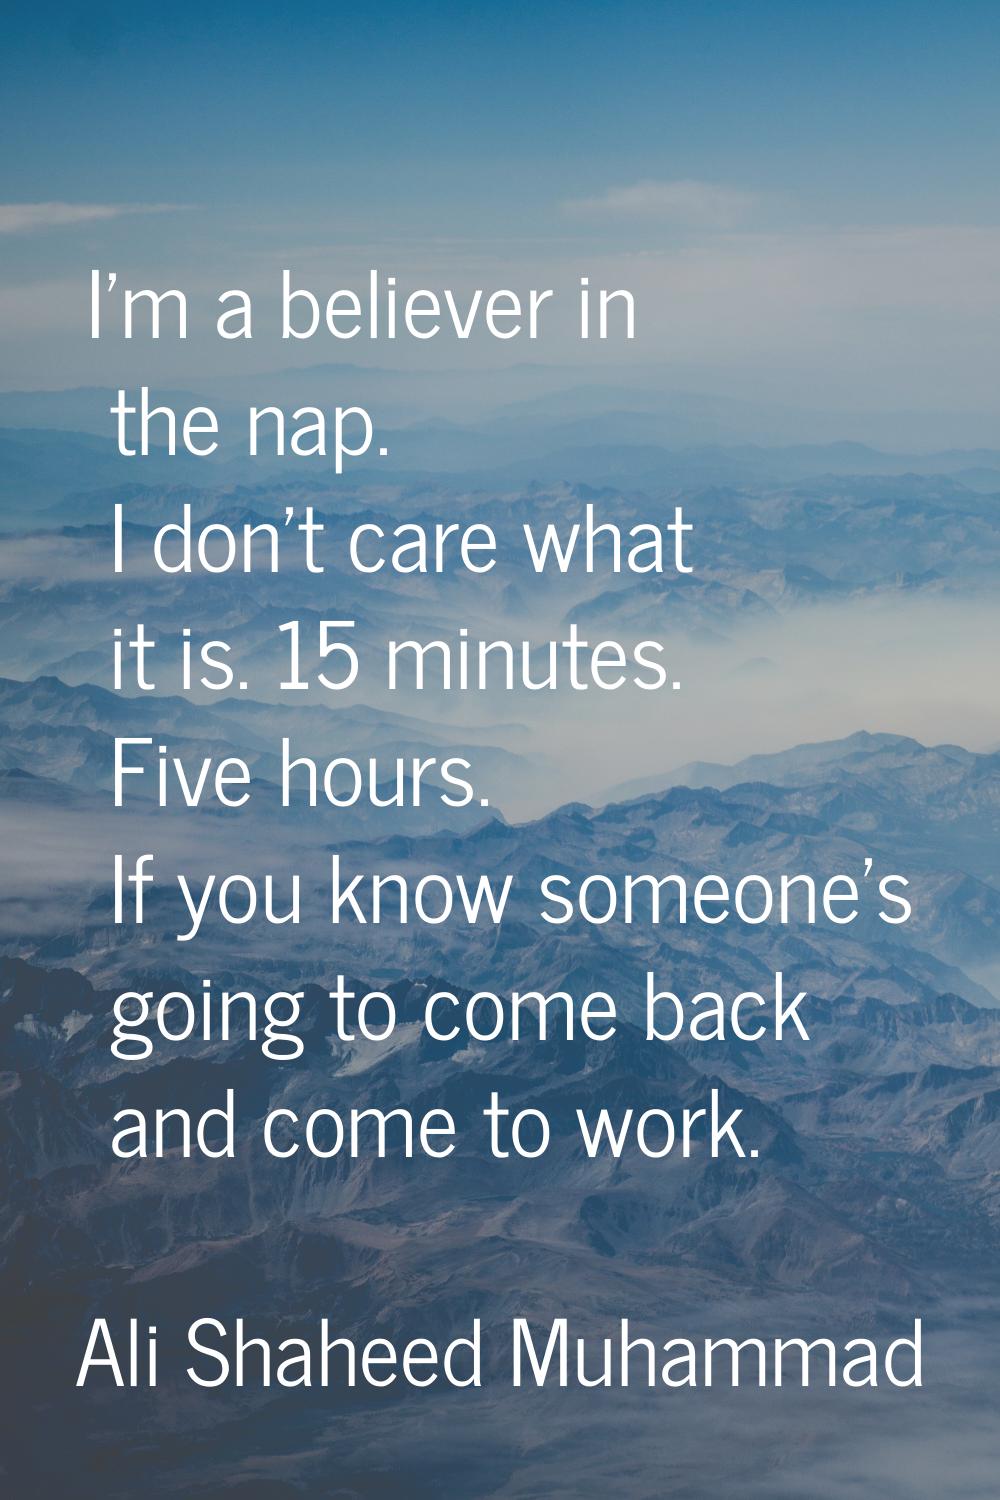 I'm a believer in the nap. I don't care what it is. 15 minutes. Five hours. If you know someone's g